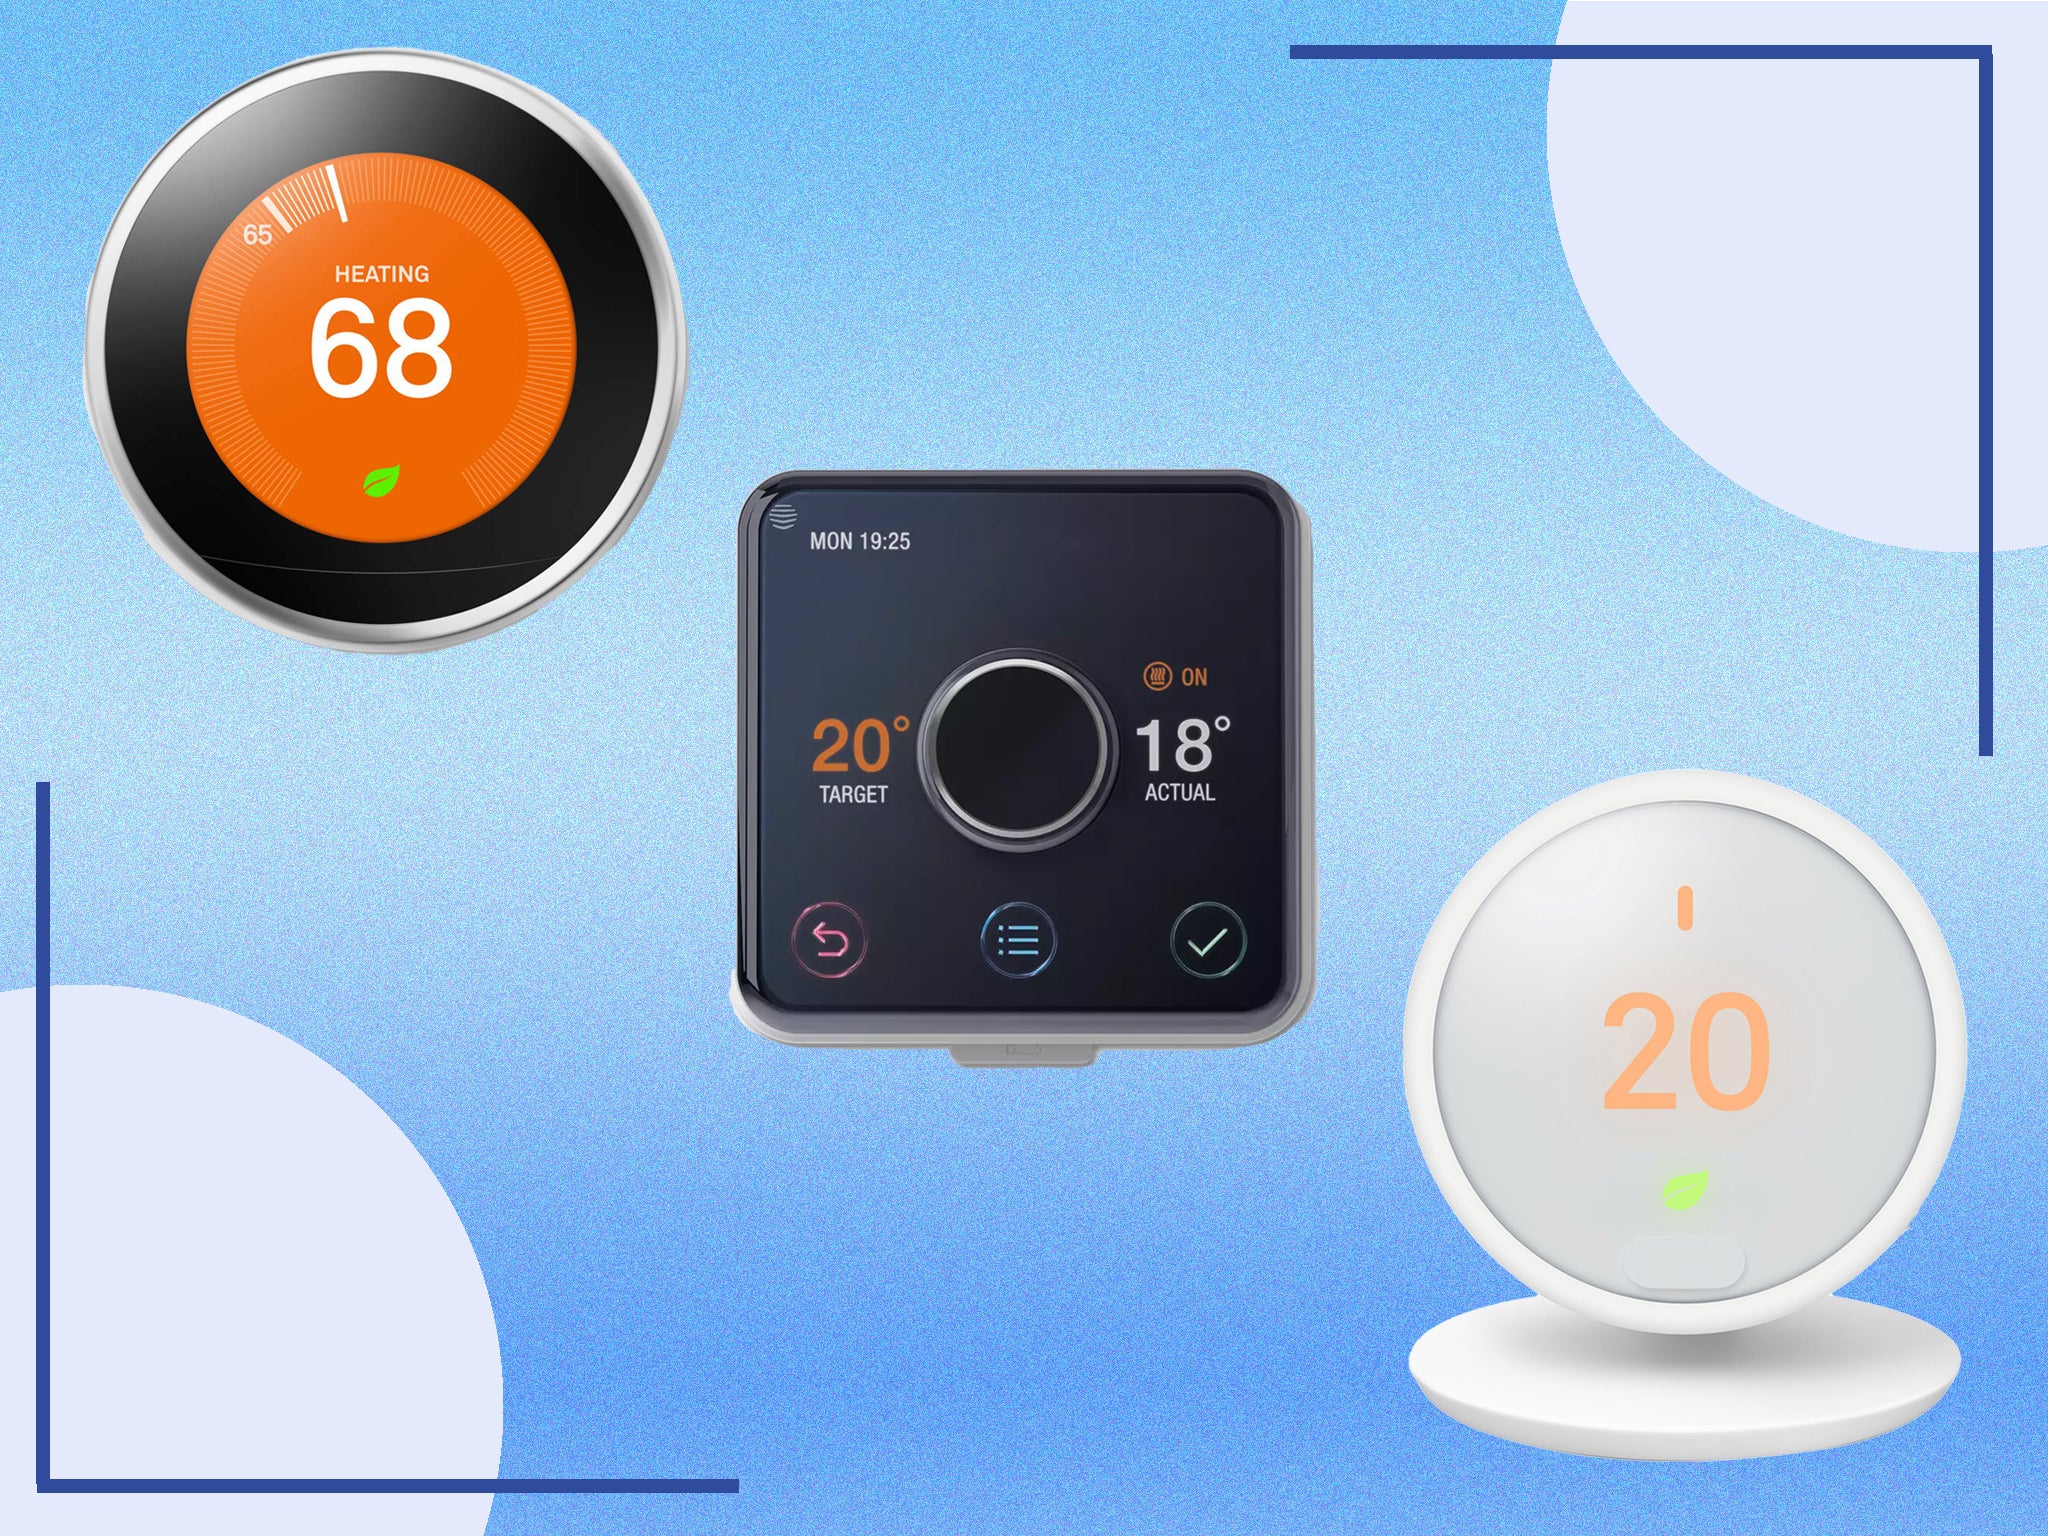 https://static.independent.co.uk/2021/12/22/11/smart%20thermostats%20indybest%20.jpg